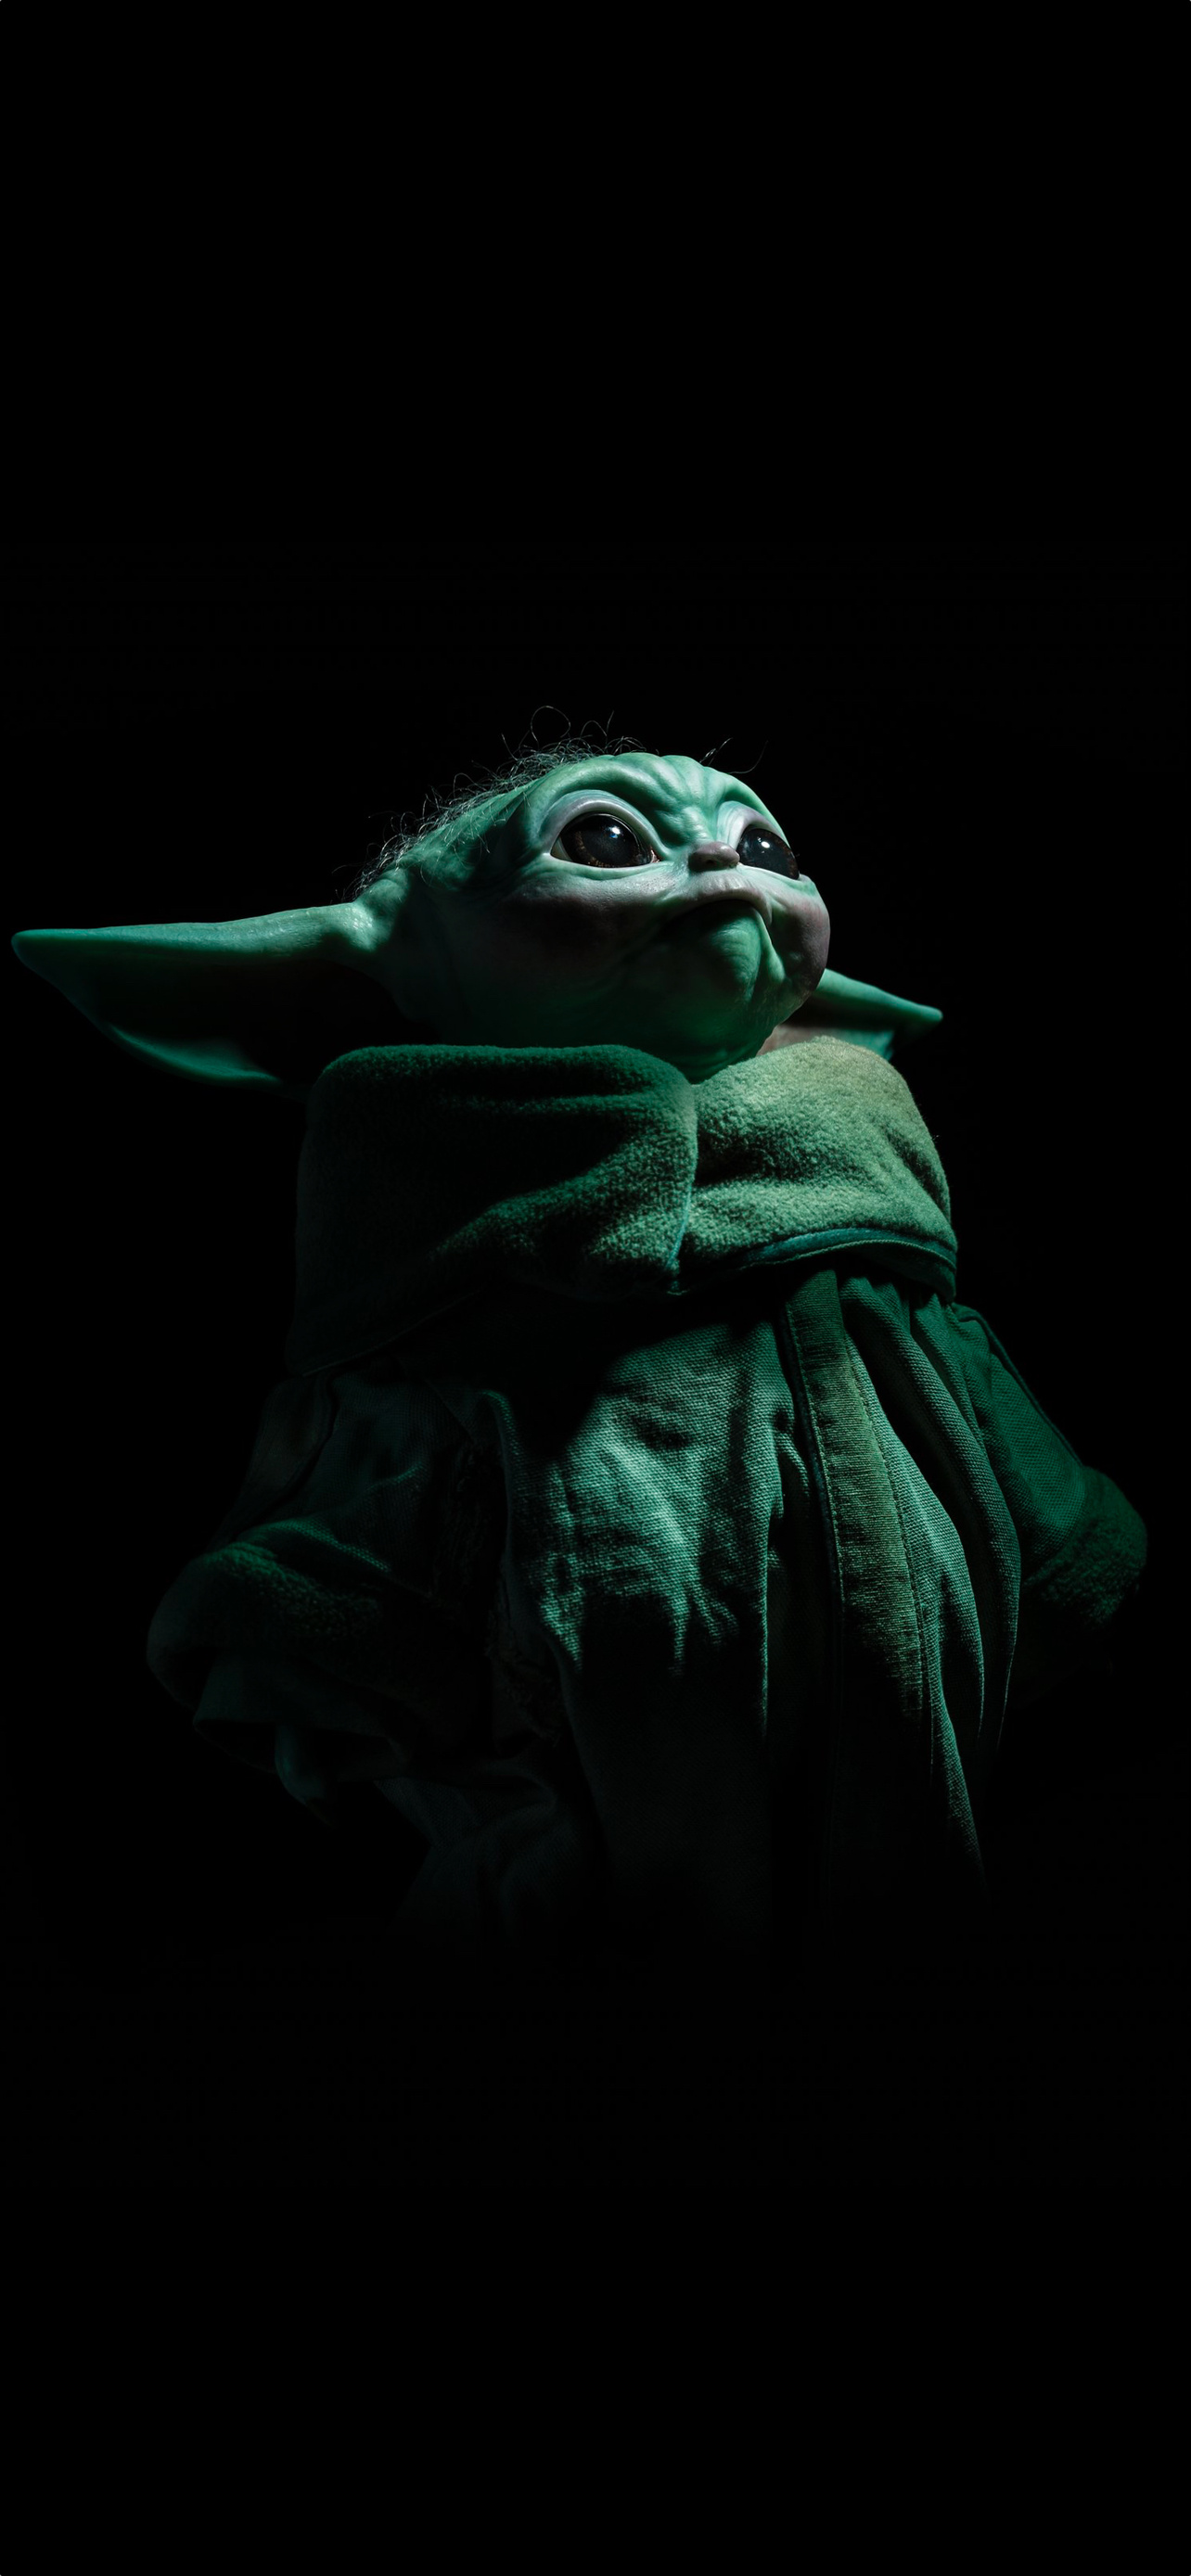 Beautiful wallpapers of Grogu, The Child, Star Wars character, Free download, 1290x2780 HD Handy